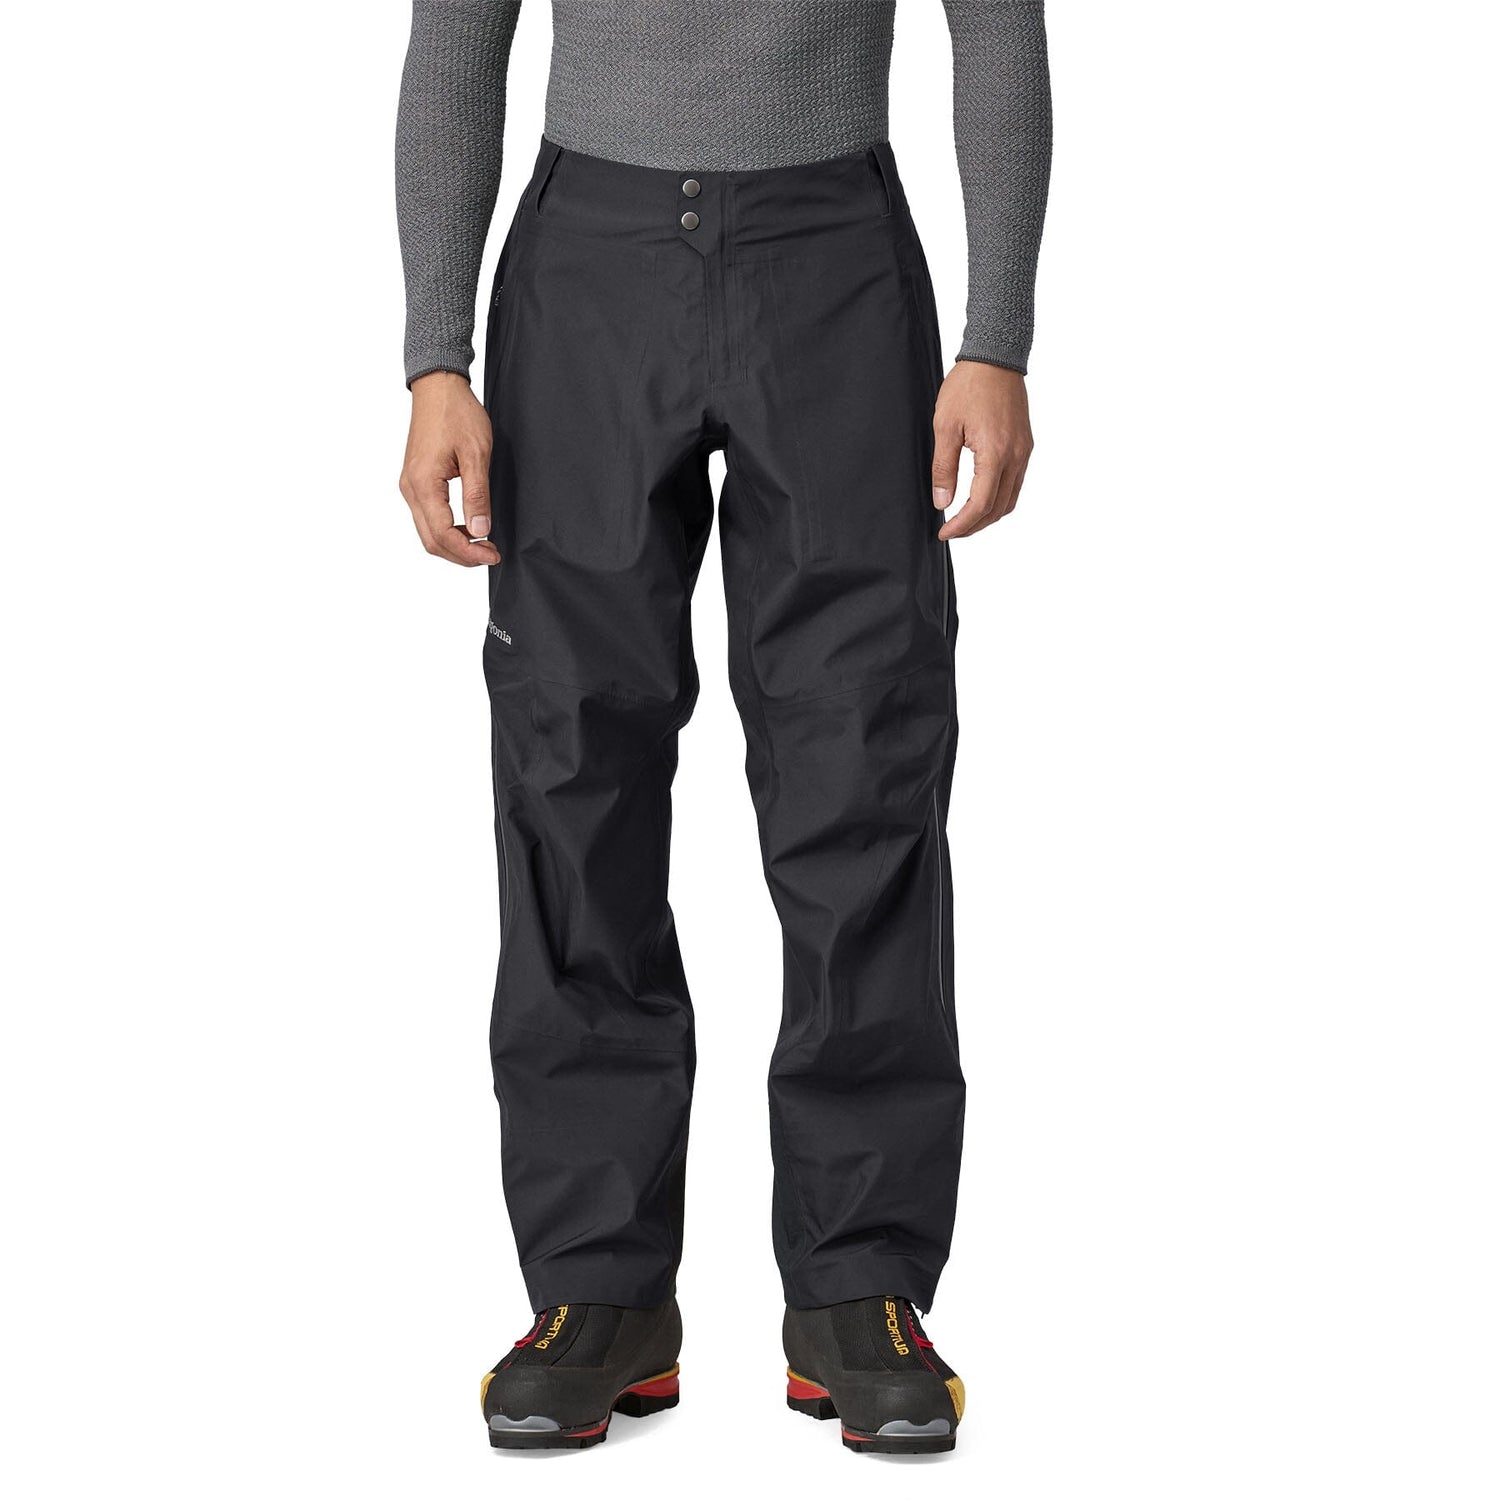 Patagonia - M's Triolet Pants - Recycled Polyester & Recycled Nylon - Weekendbee - sustainable sportswear